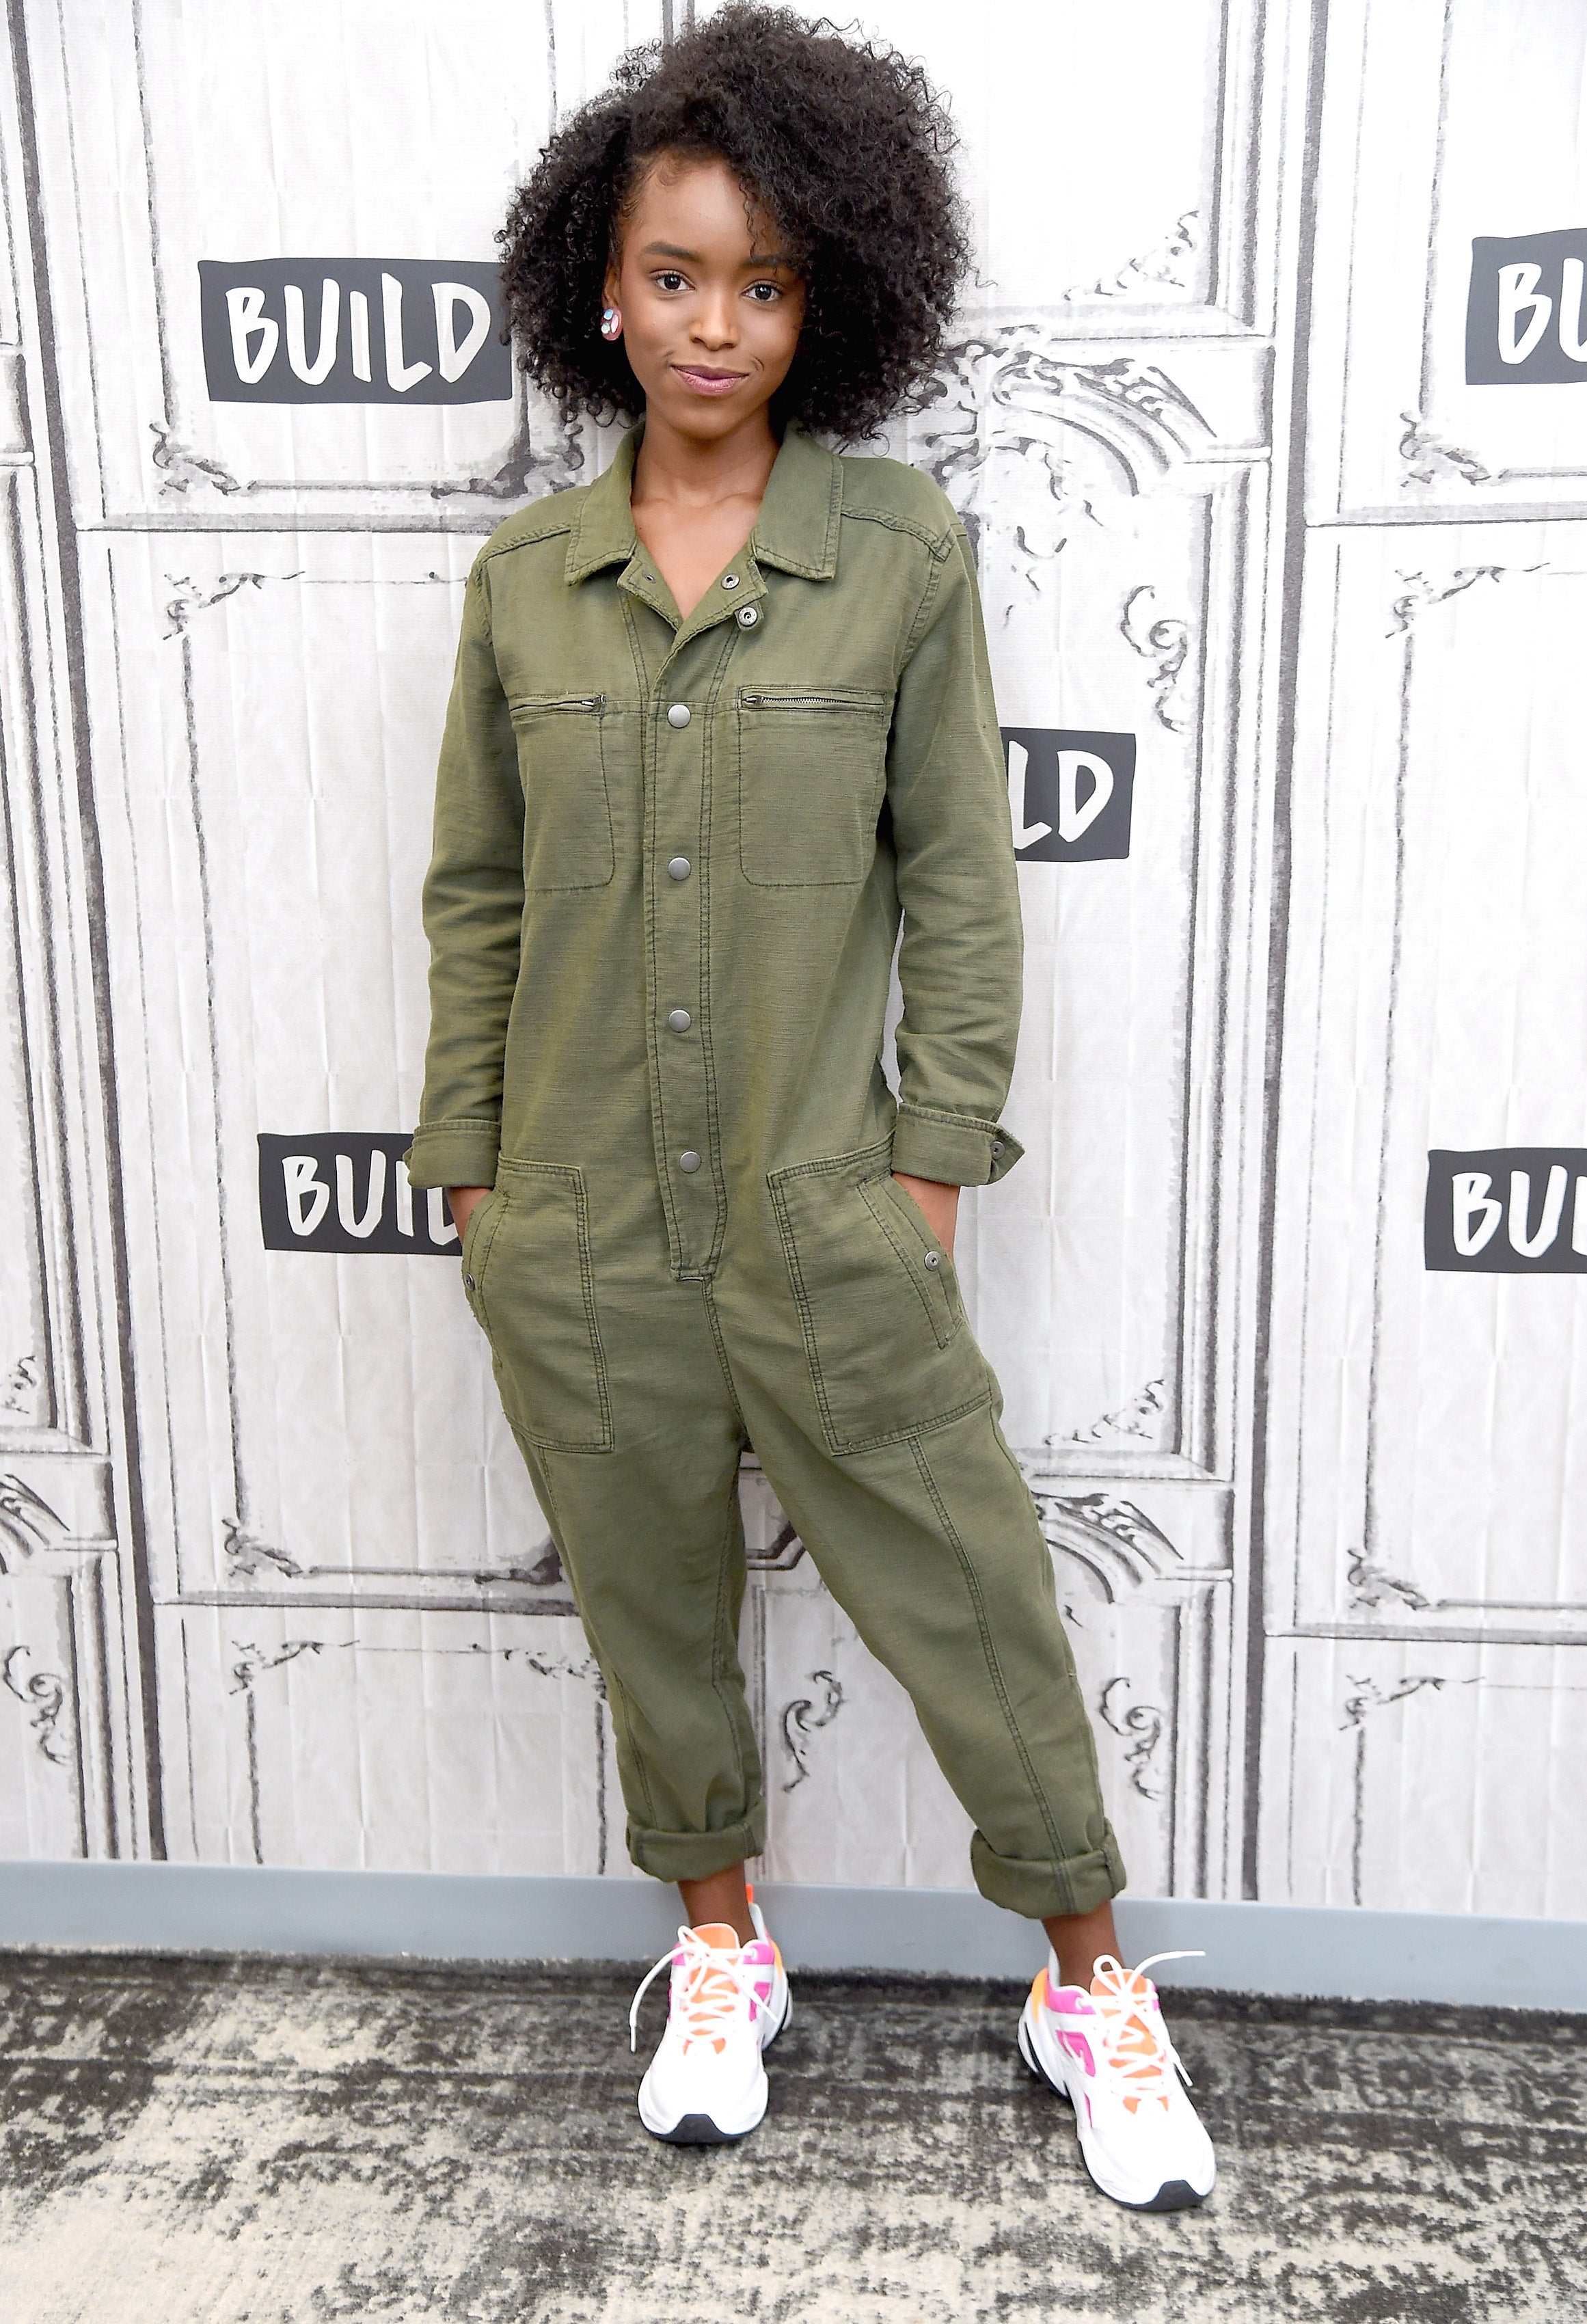 Justine Skye, Normani, Tracee Ellis Ross, And More Celebs Out and About